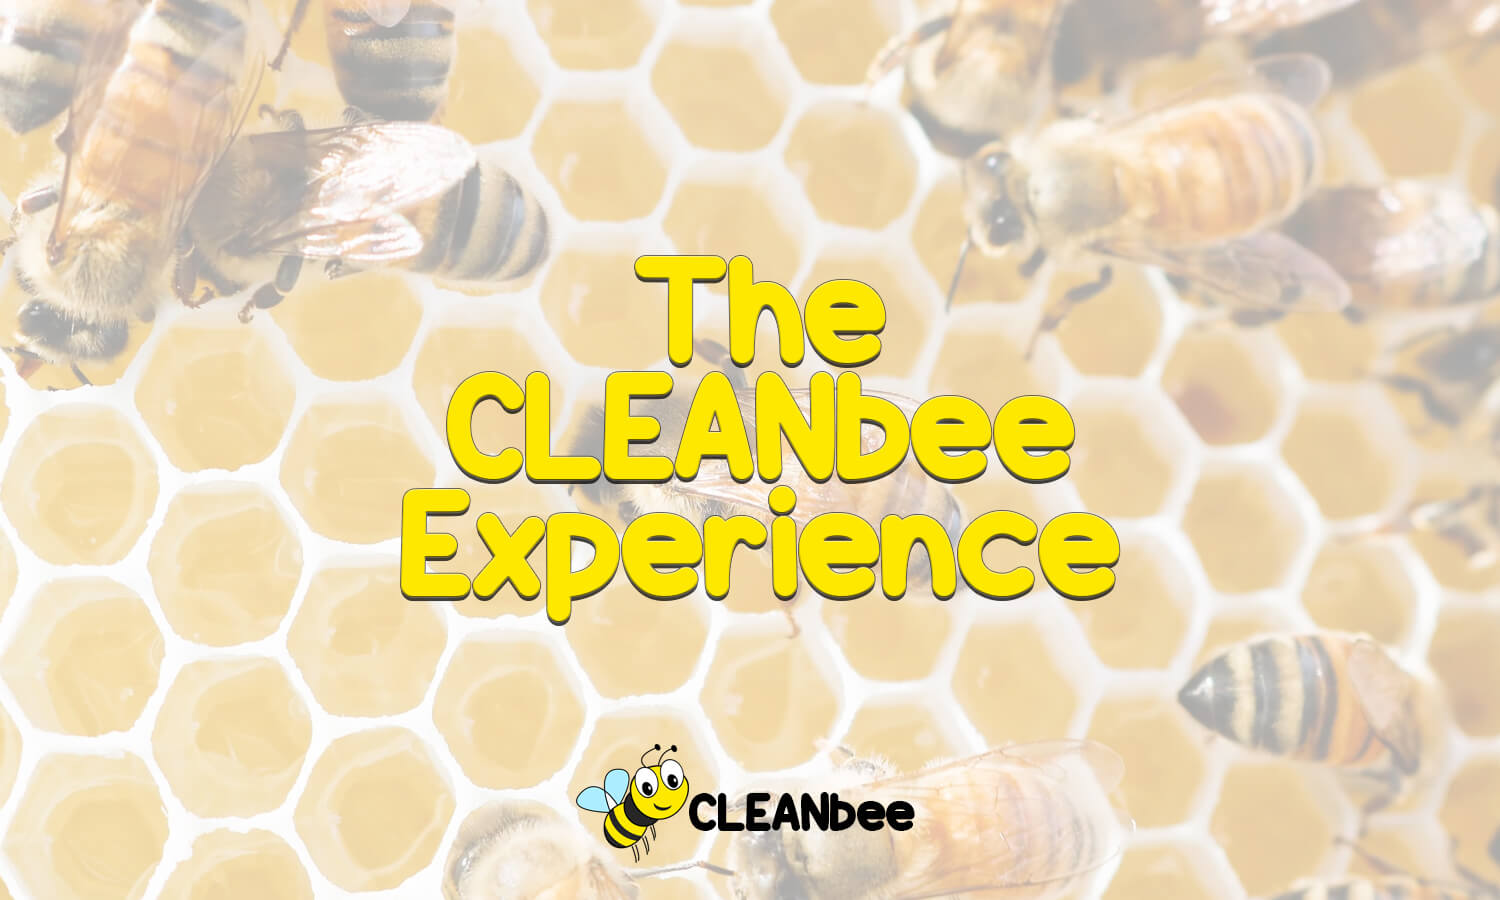 The CLEANbee Experience